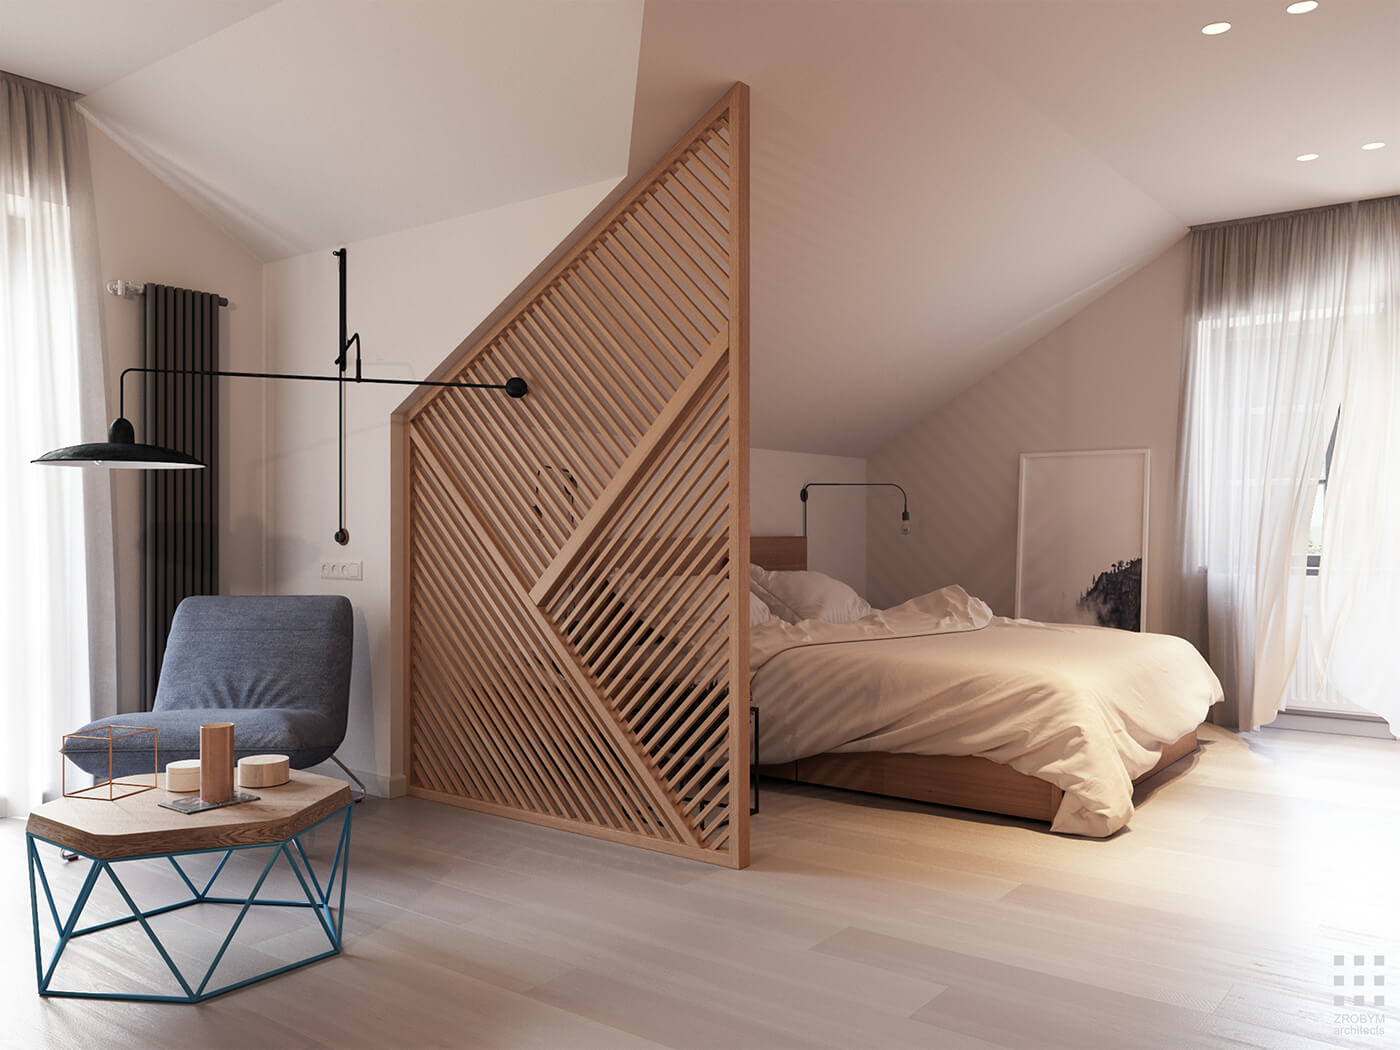 10 Dreamy Ideas for a Room Divider | NONAGON.style